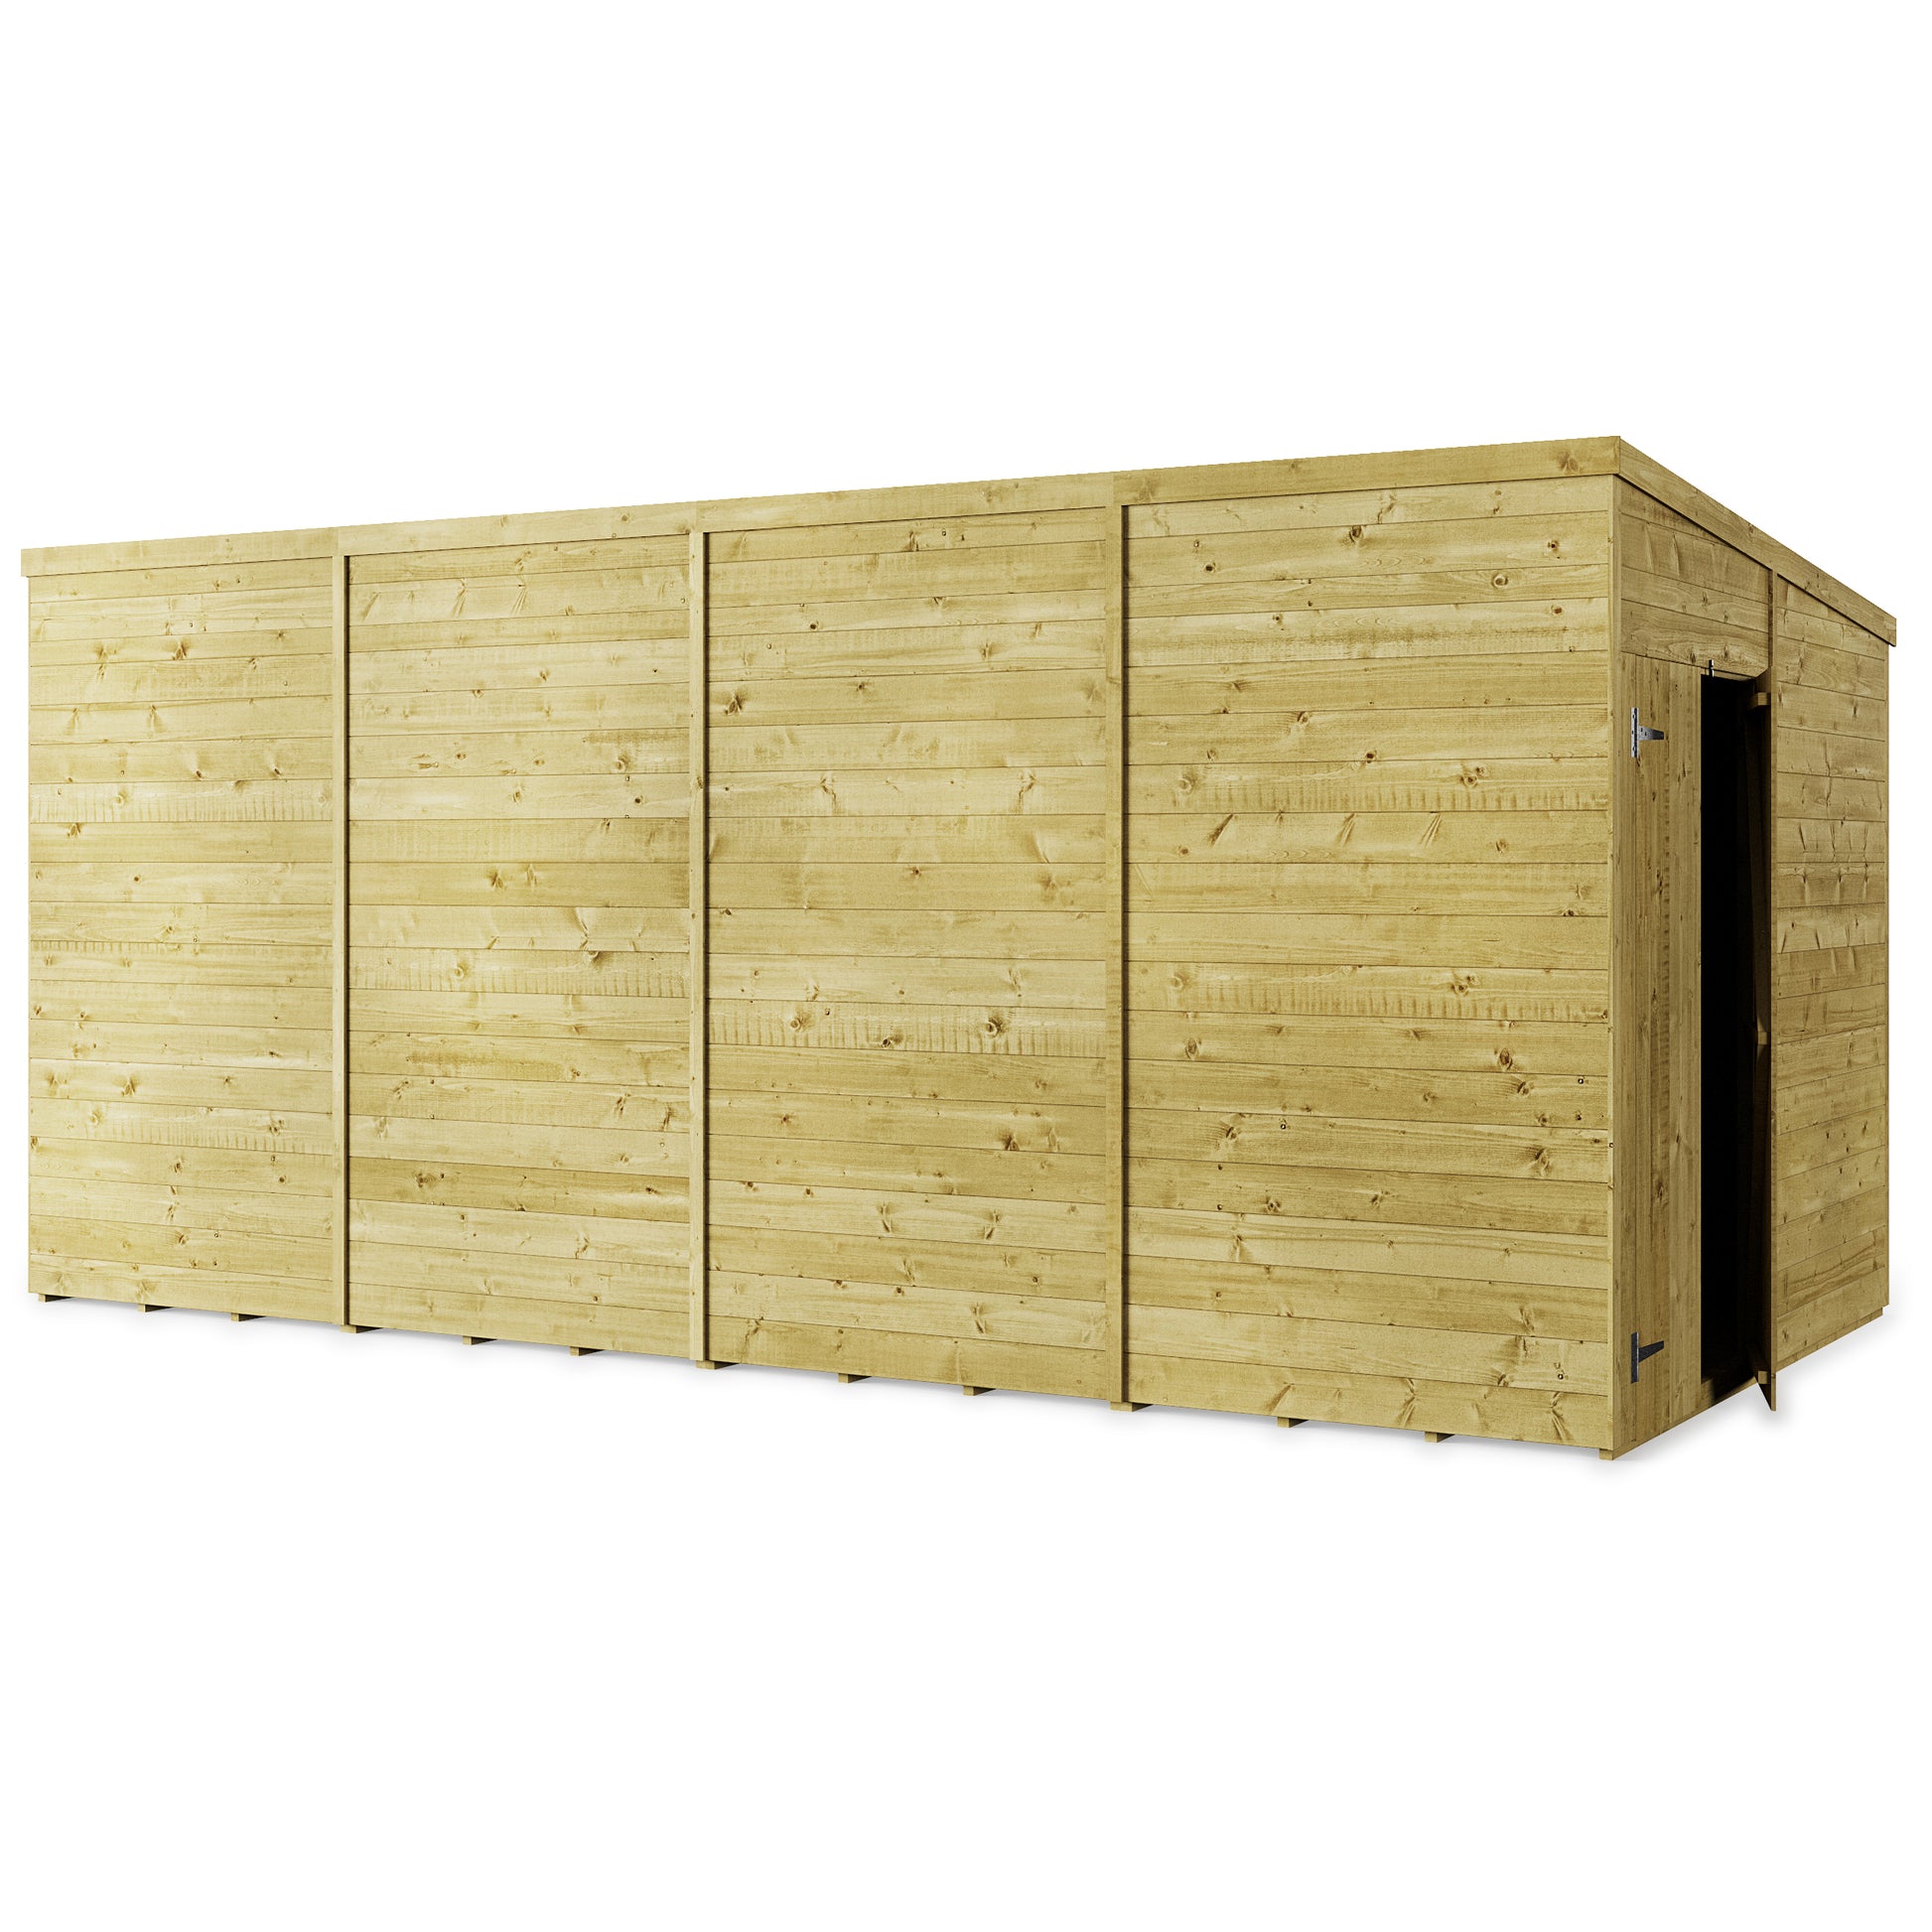 Store More 16 x 8 Tongue and Groove Pent Shed - Premium Garden